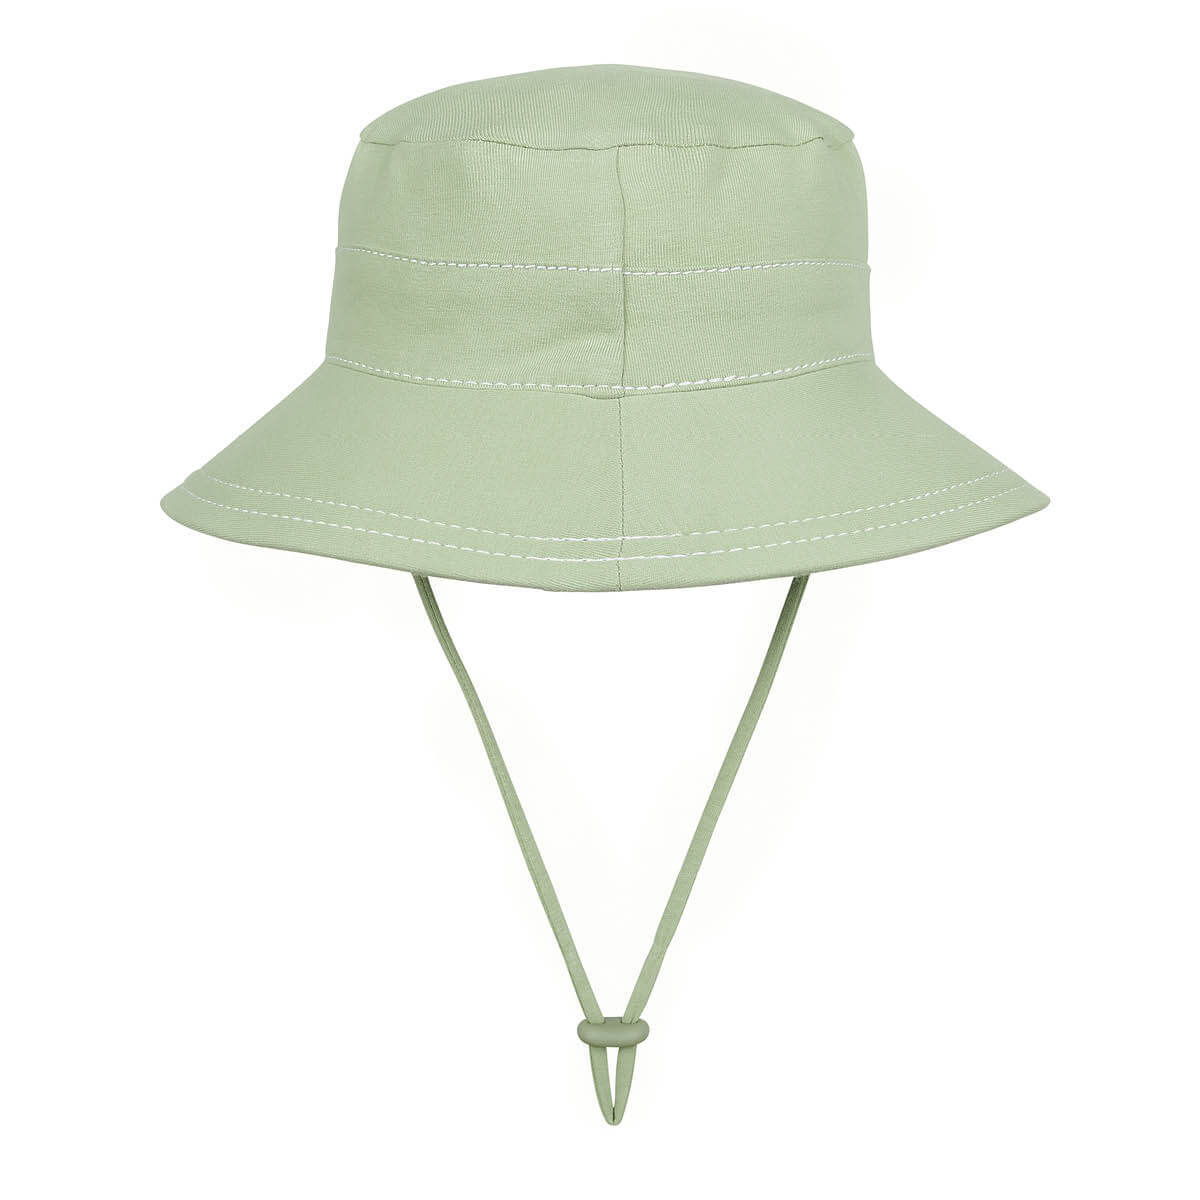 Bedhead hats - KHAKI Bucket Hat with Strap for girls, boys & baby ...